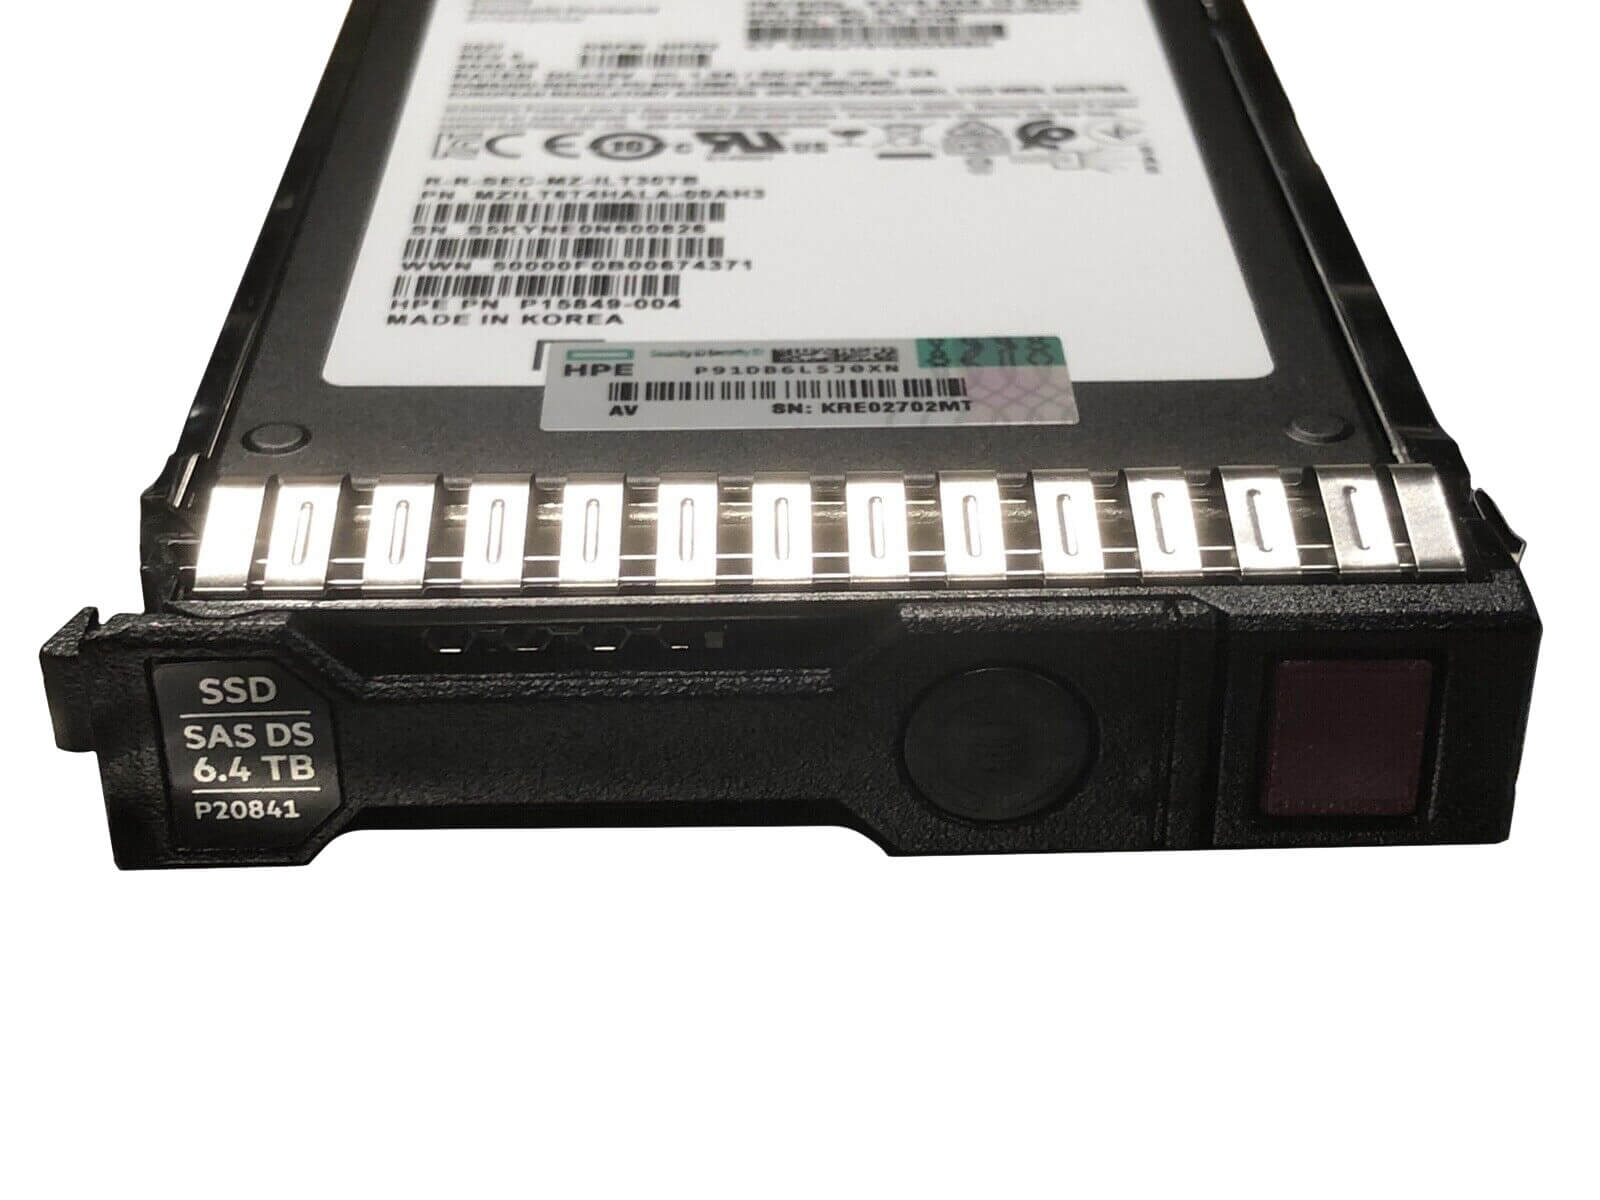 HPE P20841-001 6.4TB SAS 2.5" SFF Mixed Use SC TLC SSD Solid State Drive